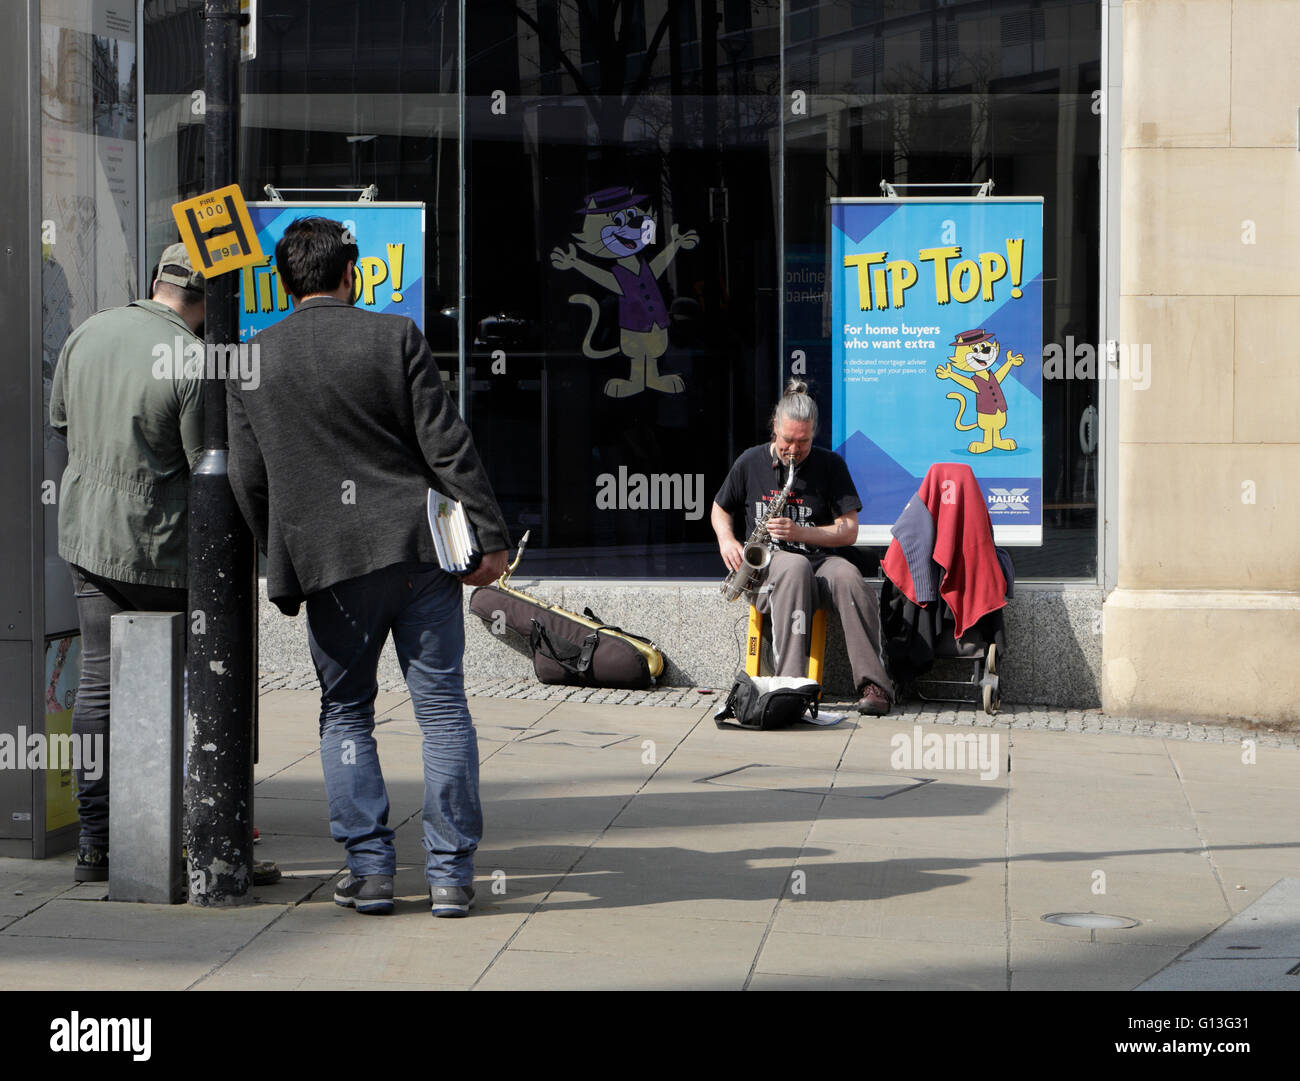 People watching street busker playing a saxophone, Sheffield city centre England, street scene Stock Photo